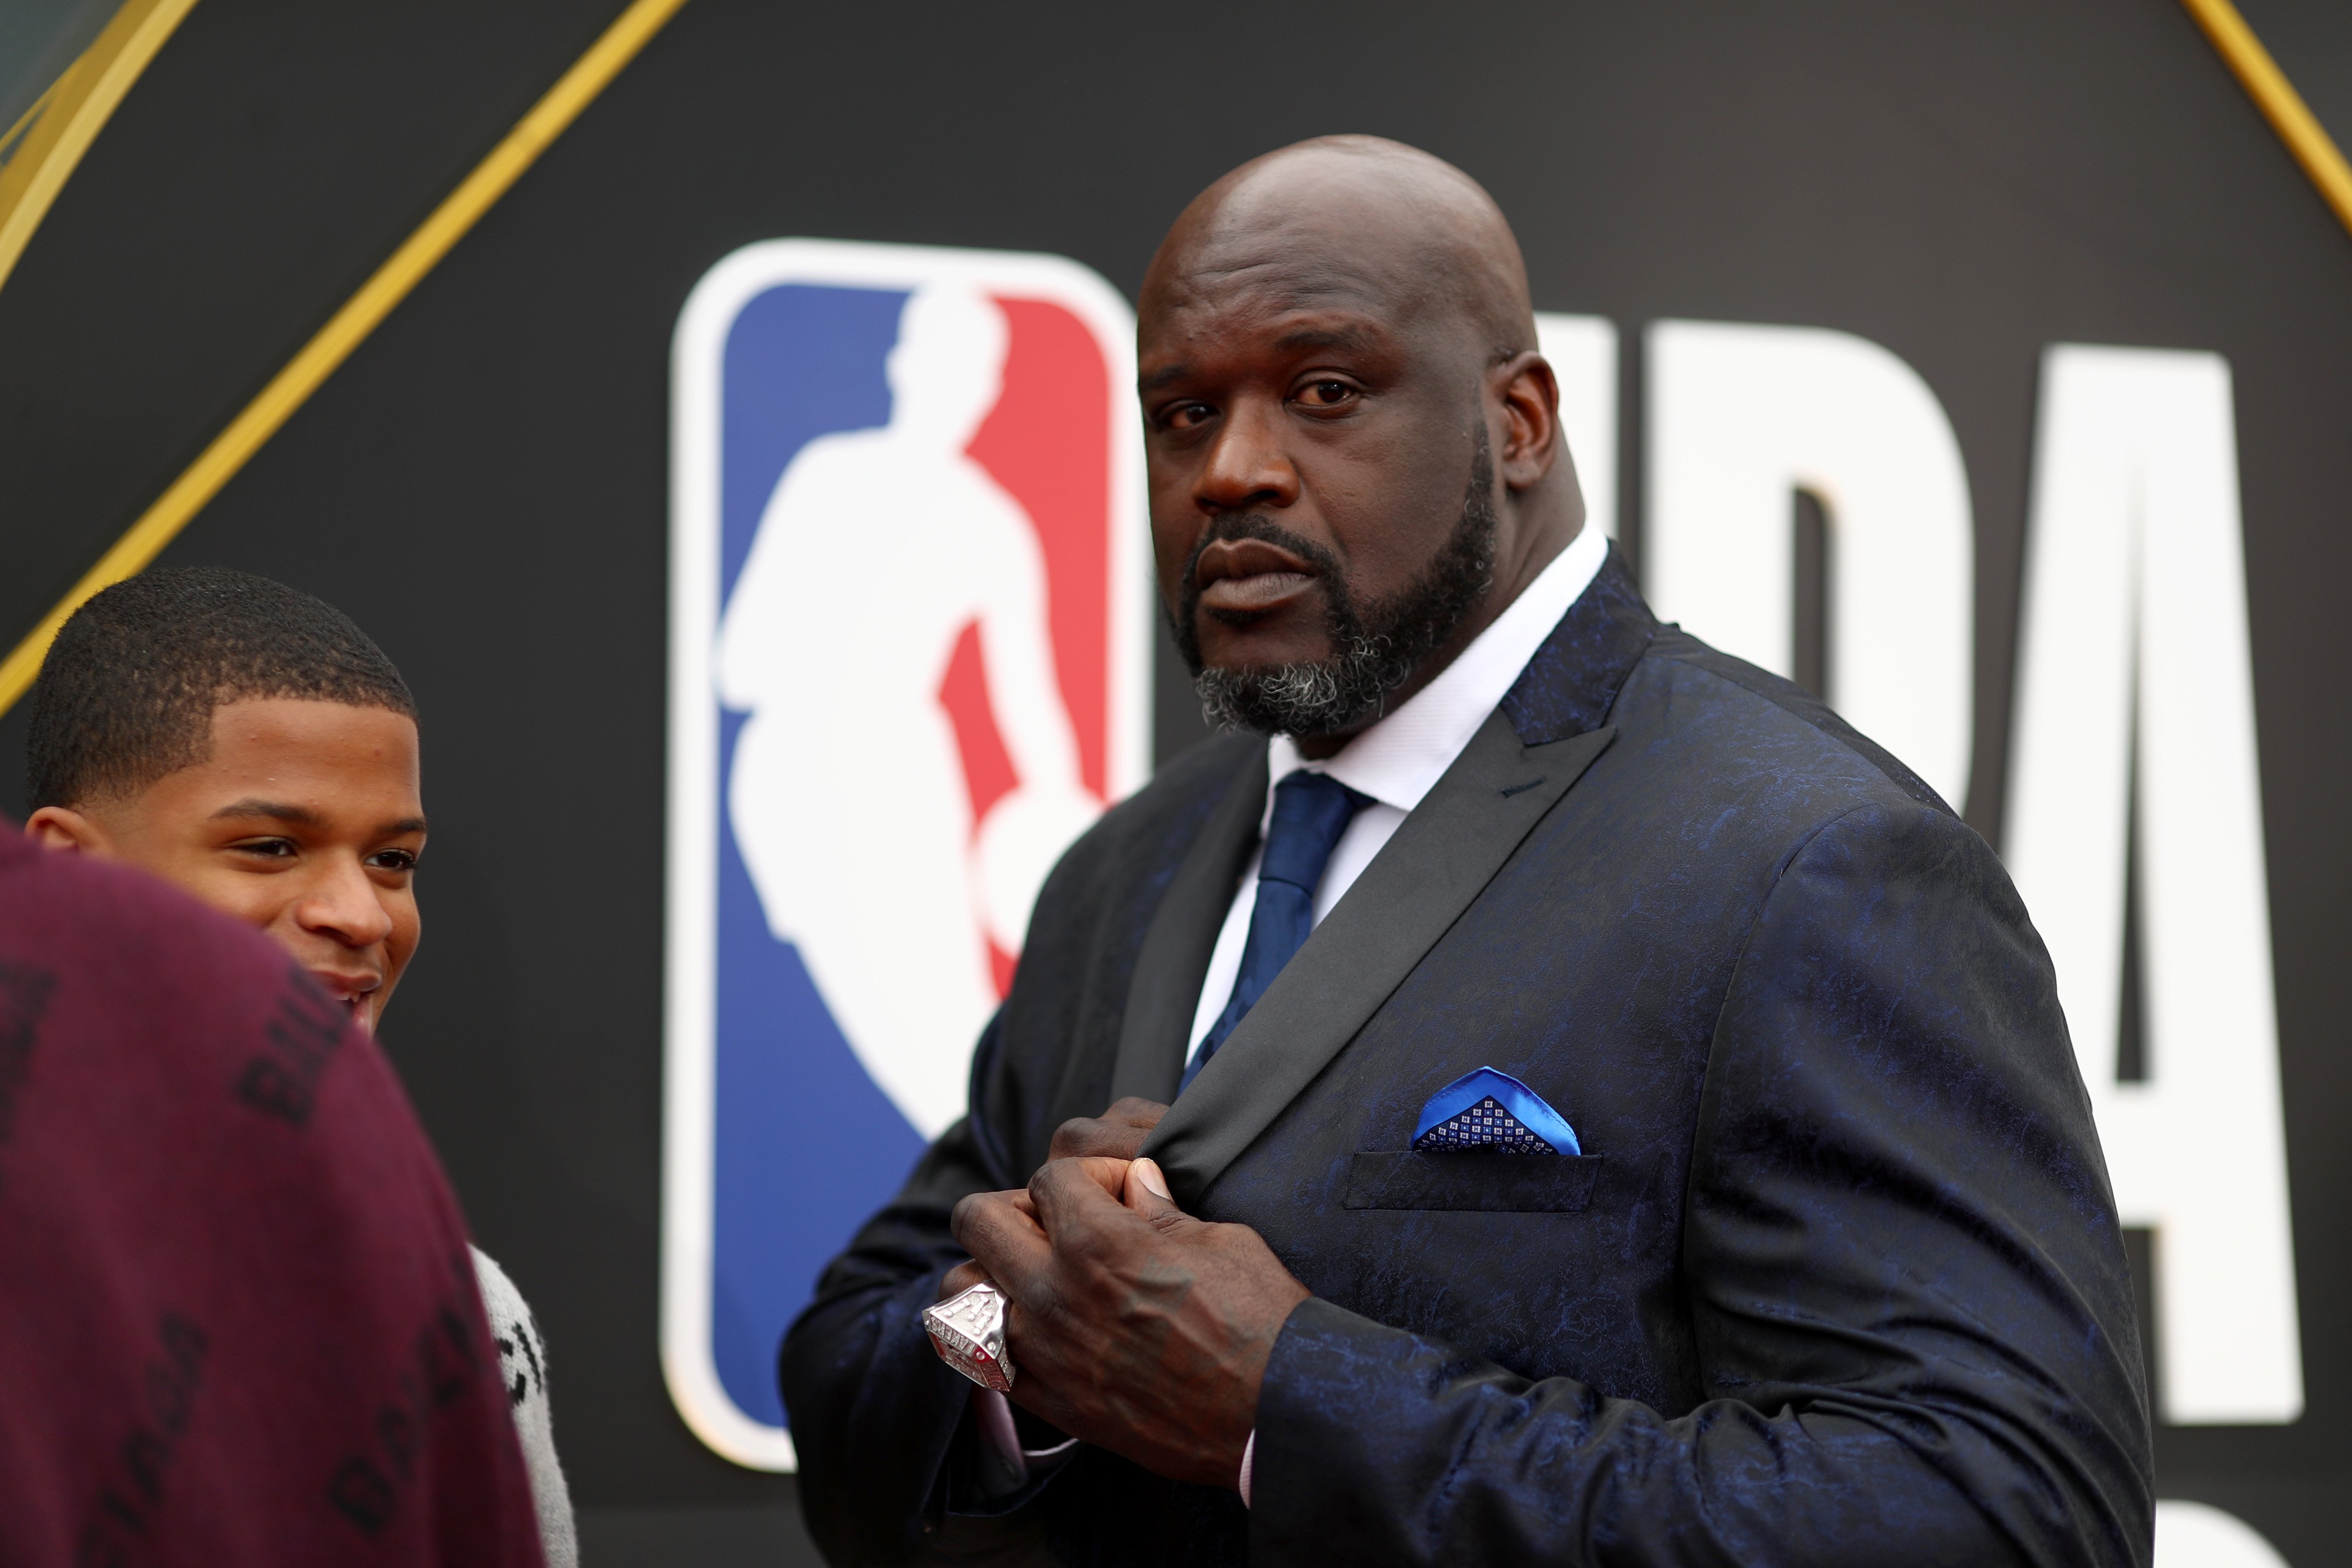 Shaquille O'Neal at the 2019 NBA Awards on June 24, 2019 in California | Photo: Getty Images